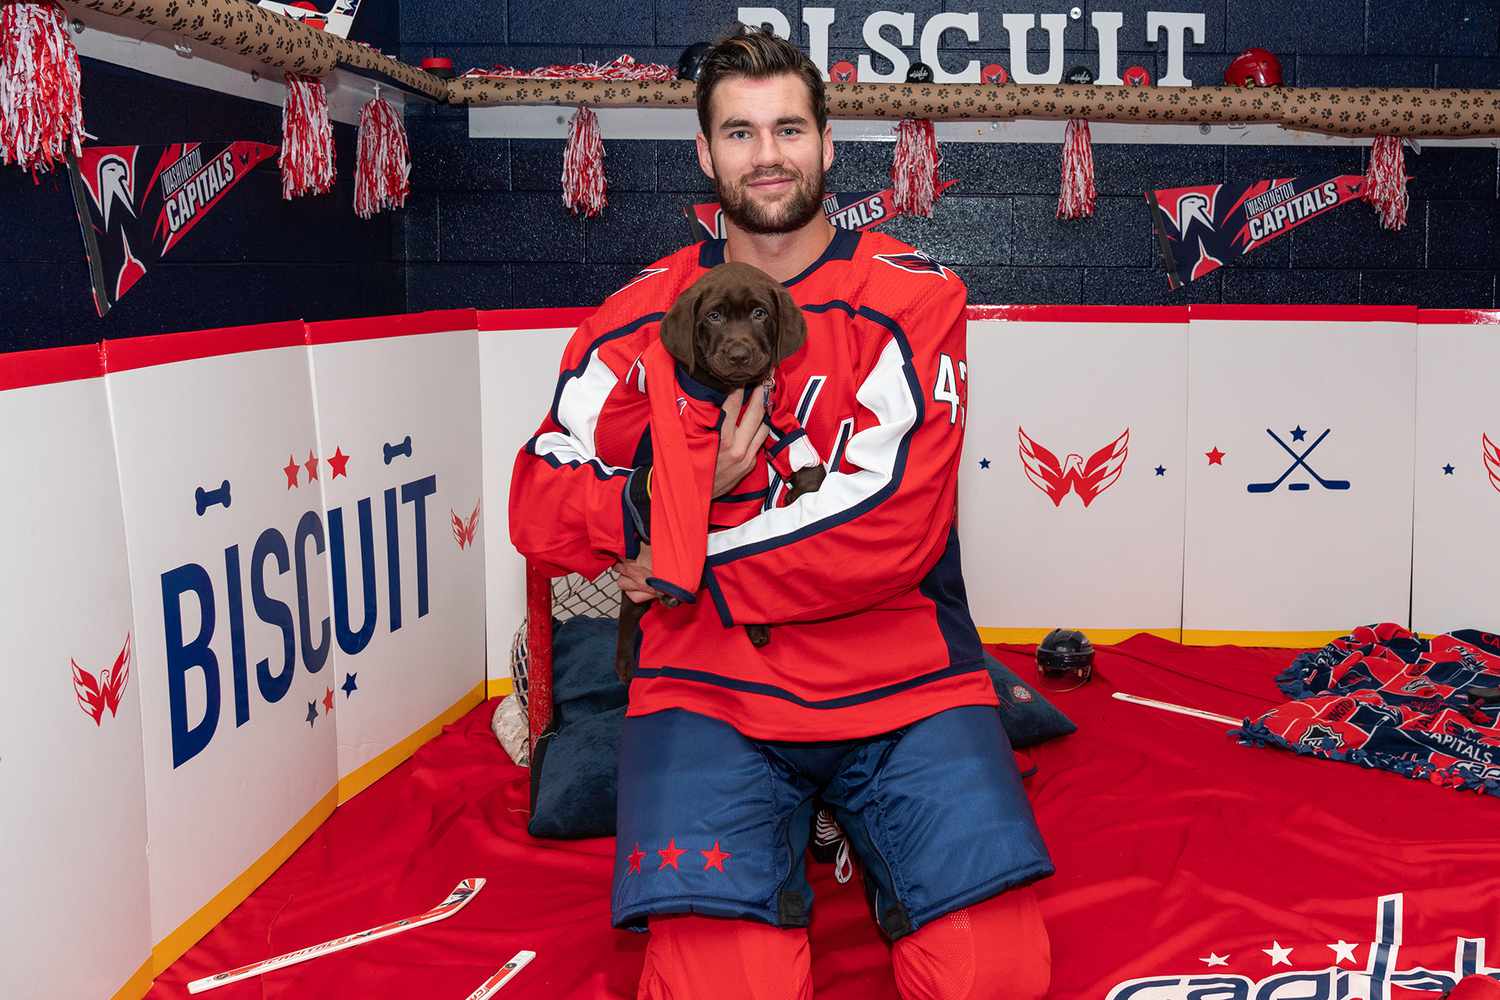 NHL Washington Capitals to Train Future Service Dog 'Biscuit' for Veteran or First Responder